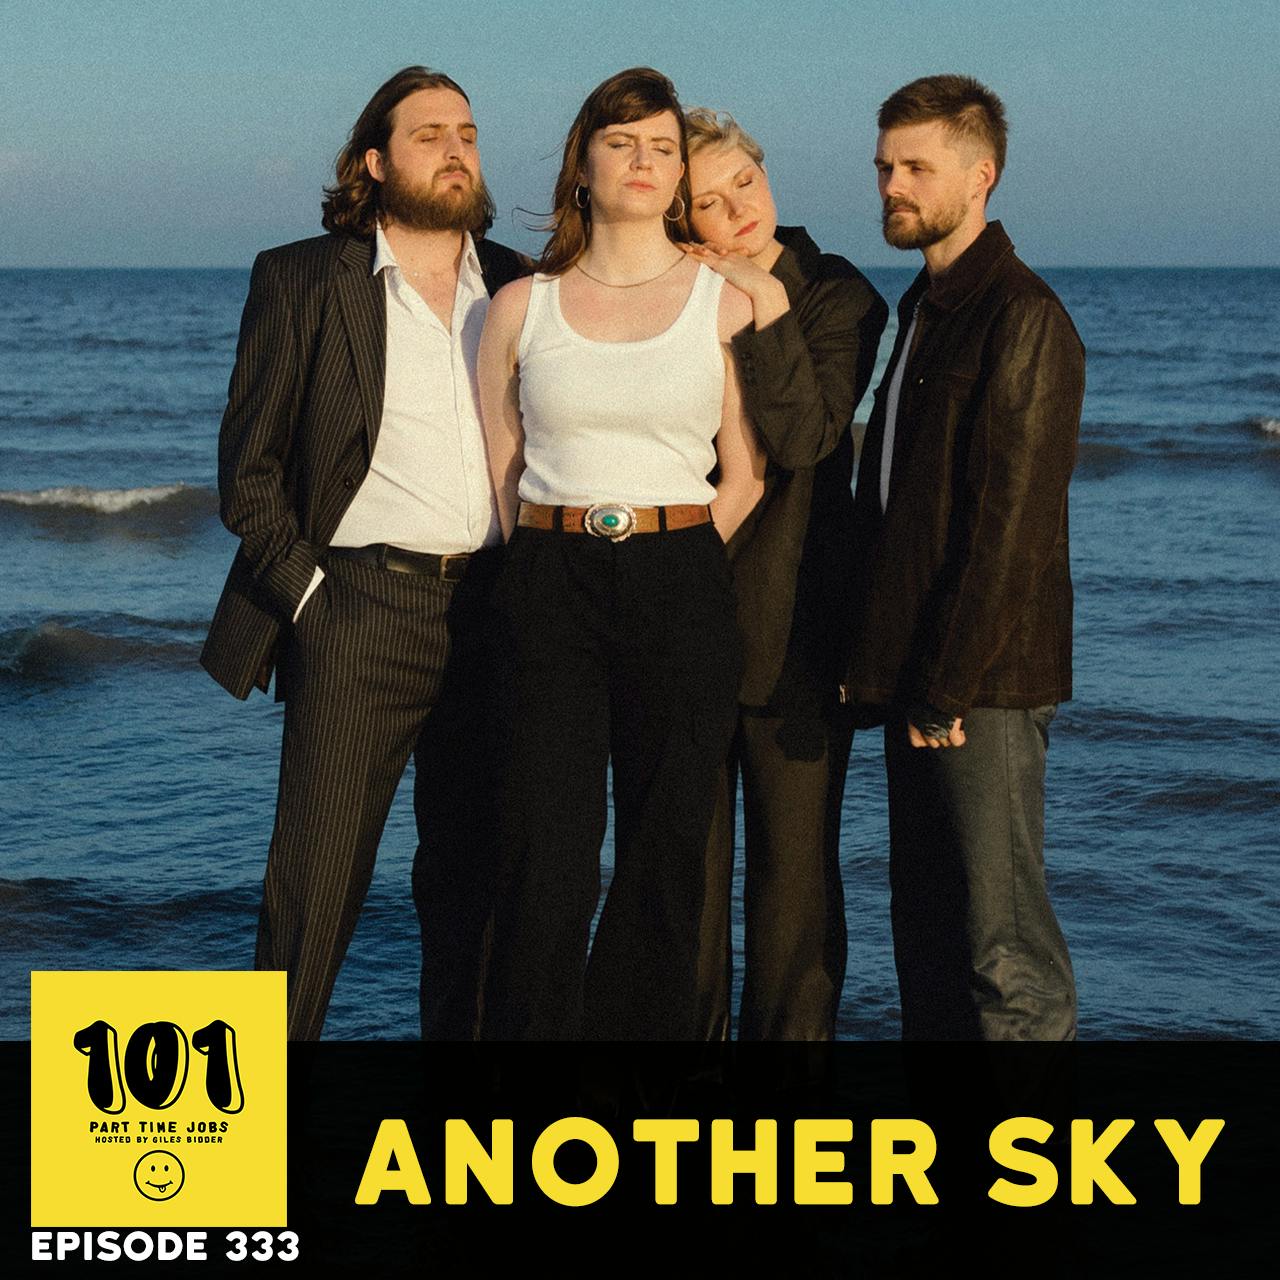 Another Sky - ”I’ve put everything into this band”